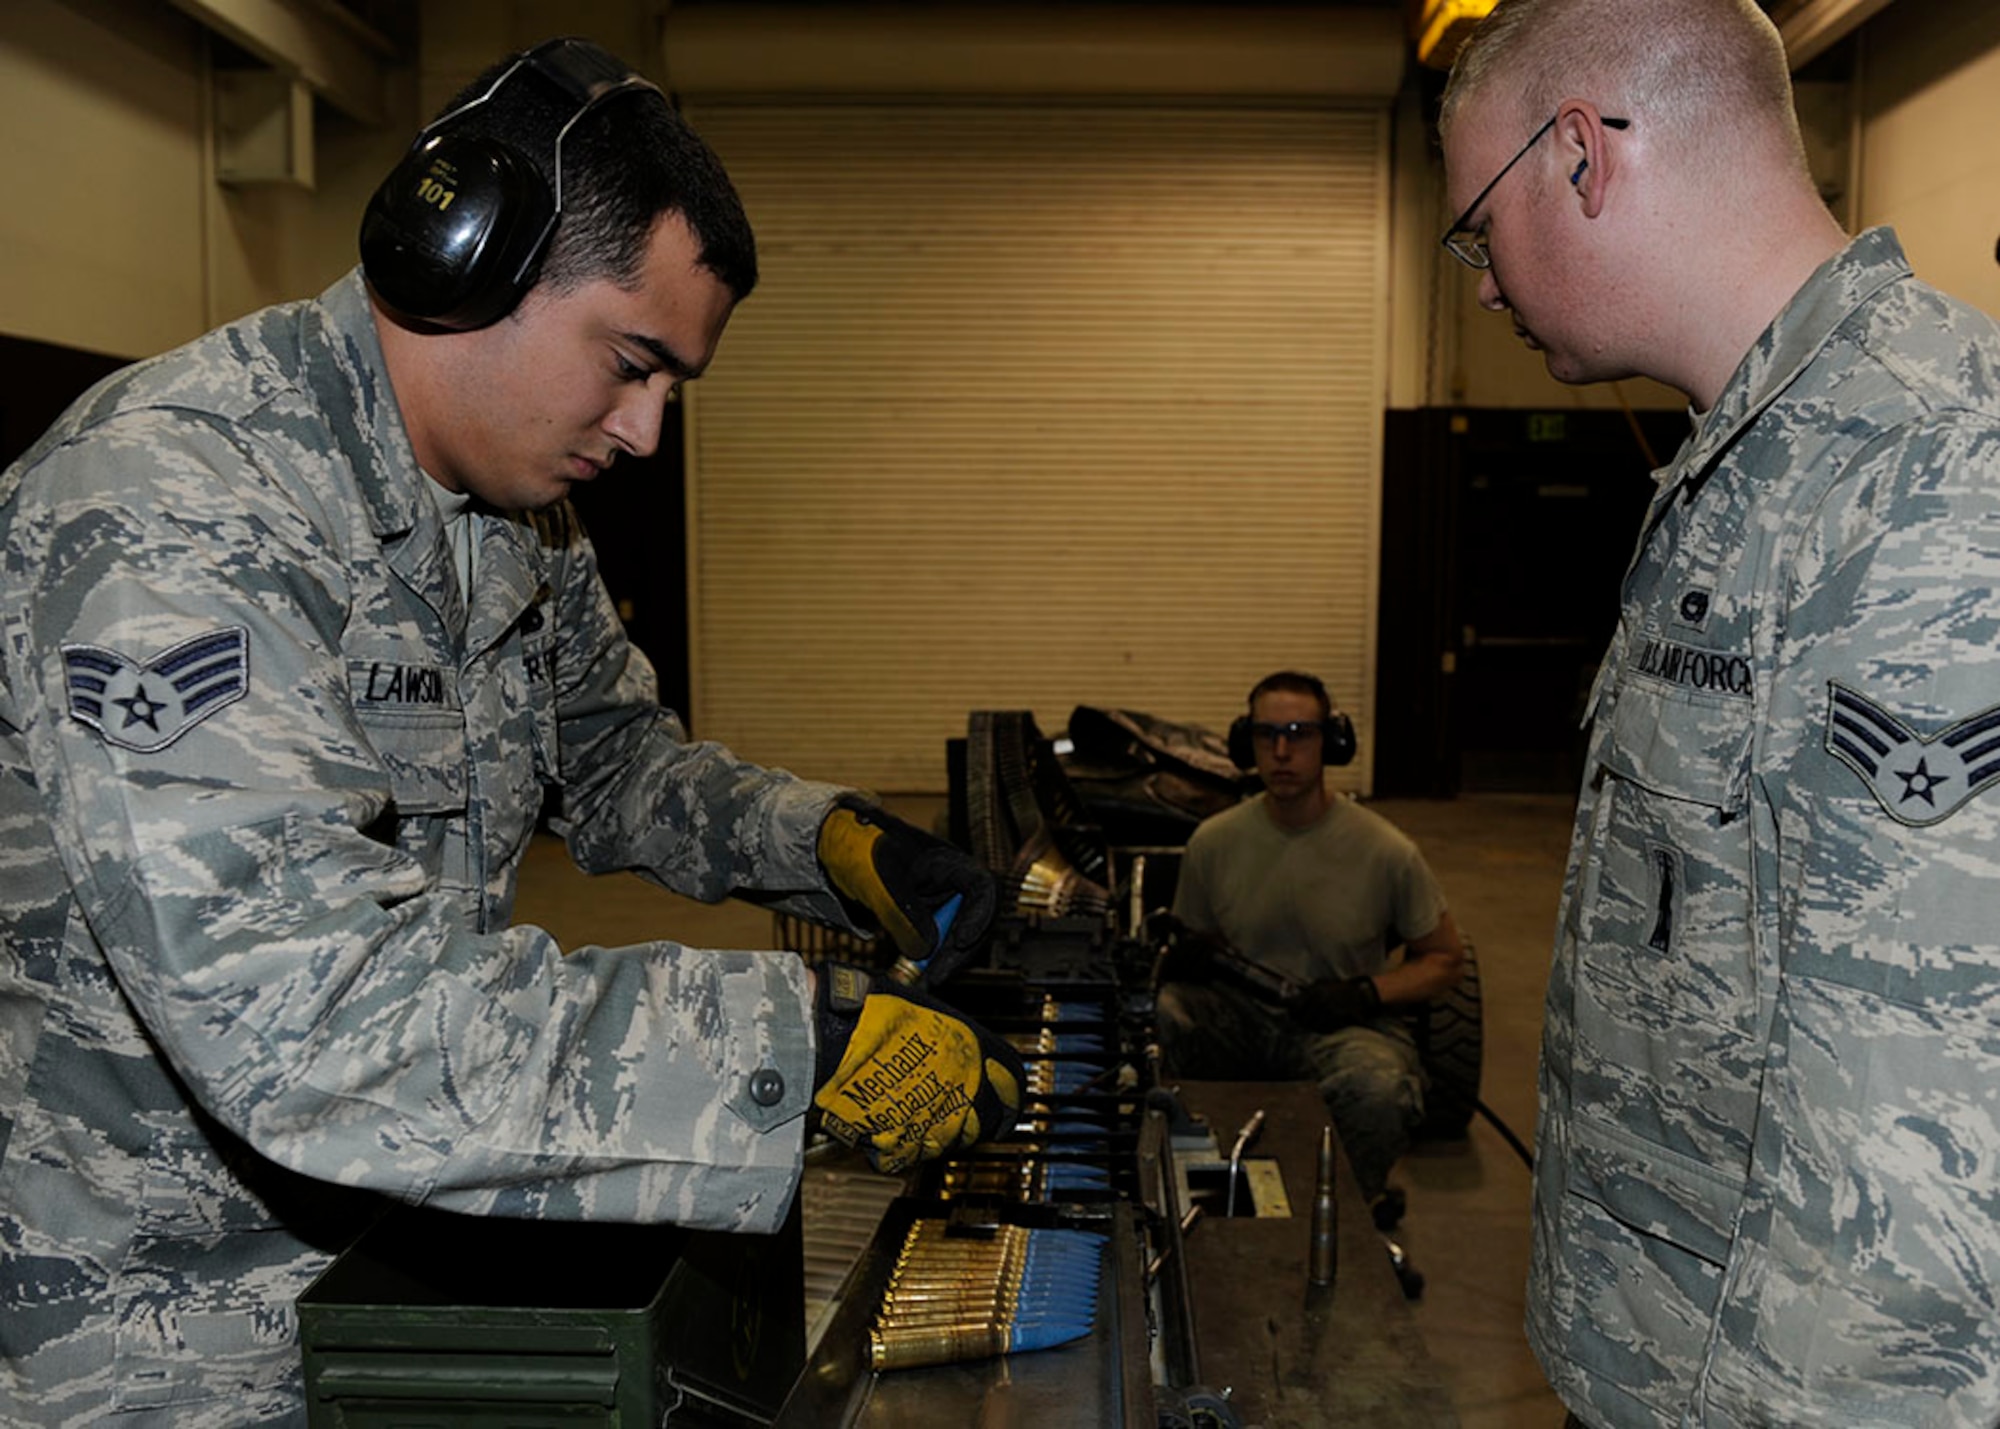 Members of the 3rd Munitions Squadron Conventional Maintenance use an ammunition loading system replenisher assembly to load 20-milimeter rounds into a universal ammunition loading system on Joint Base Elmendorf-Richardson, Alaska, April 26. The rounds will be used by F-22s to fire at a target banner during aerial combat training. (U.S. Air Force photo/Staff Sgt. Robert Barnett)